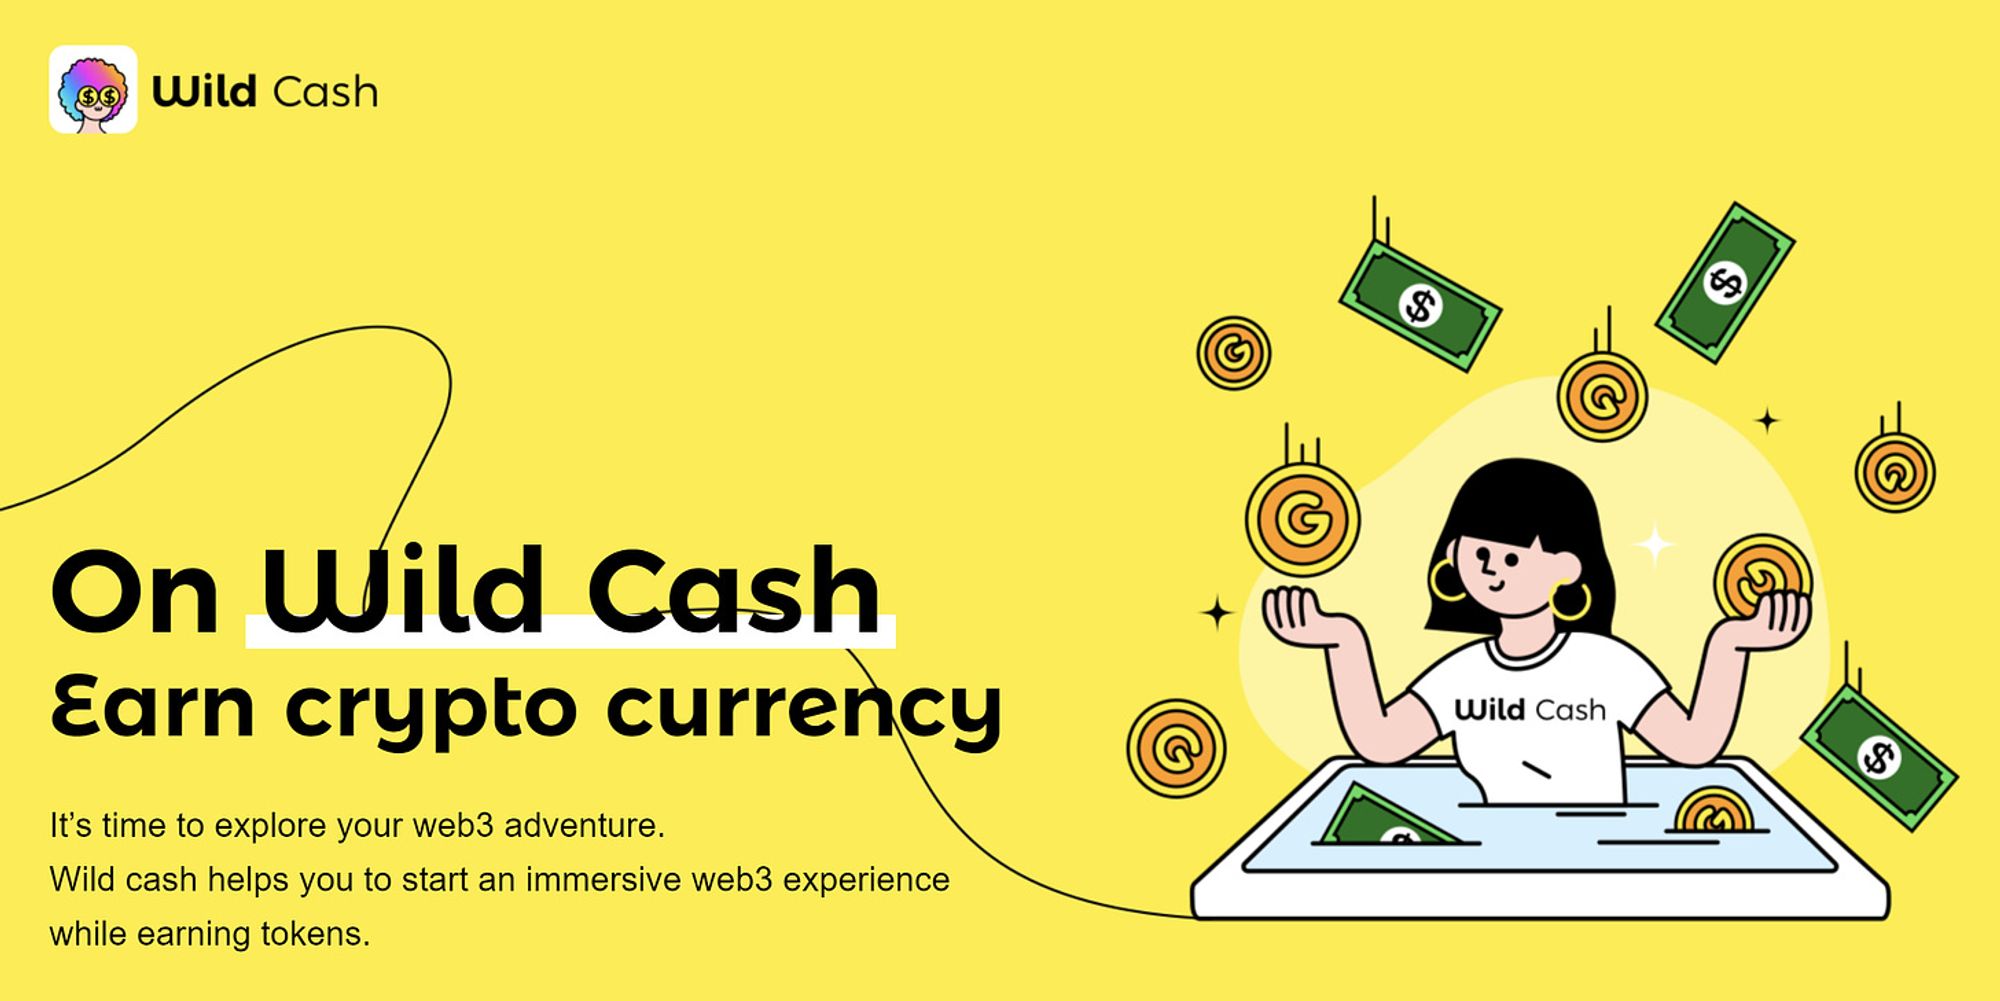 Wild Cash - The first product powered by hooked protocal’s growth engine